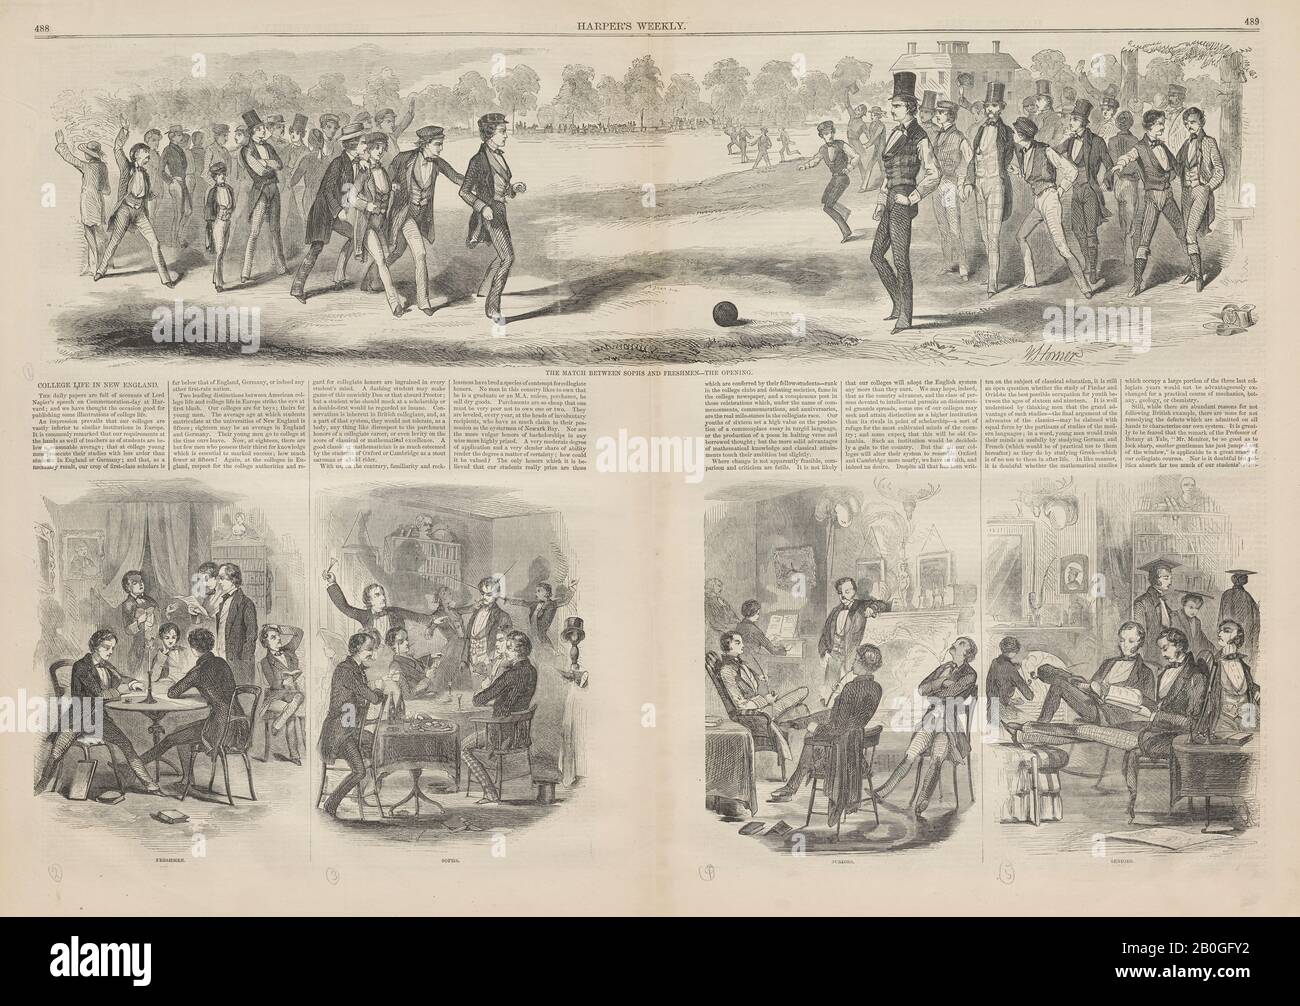 After Winslow Homer, American, 1836–1910, The Match Between Sophs and Freshmen—The Opening; Freshmen and Sophs; Juniors and Seniors, From Harper's Weekly, vol. 1, 1 Aug. 1857, Wood engraving on newsprint, Sheet: 14 1/16 x 20 5/8 in. (35.7 x 52.4 cm Stock Photo